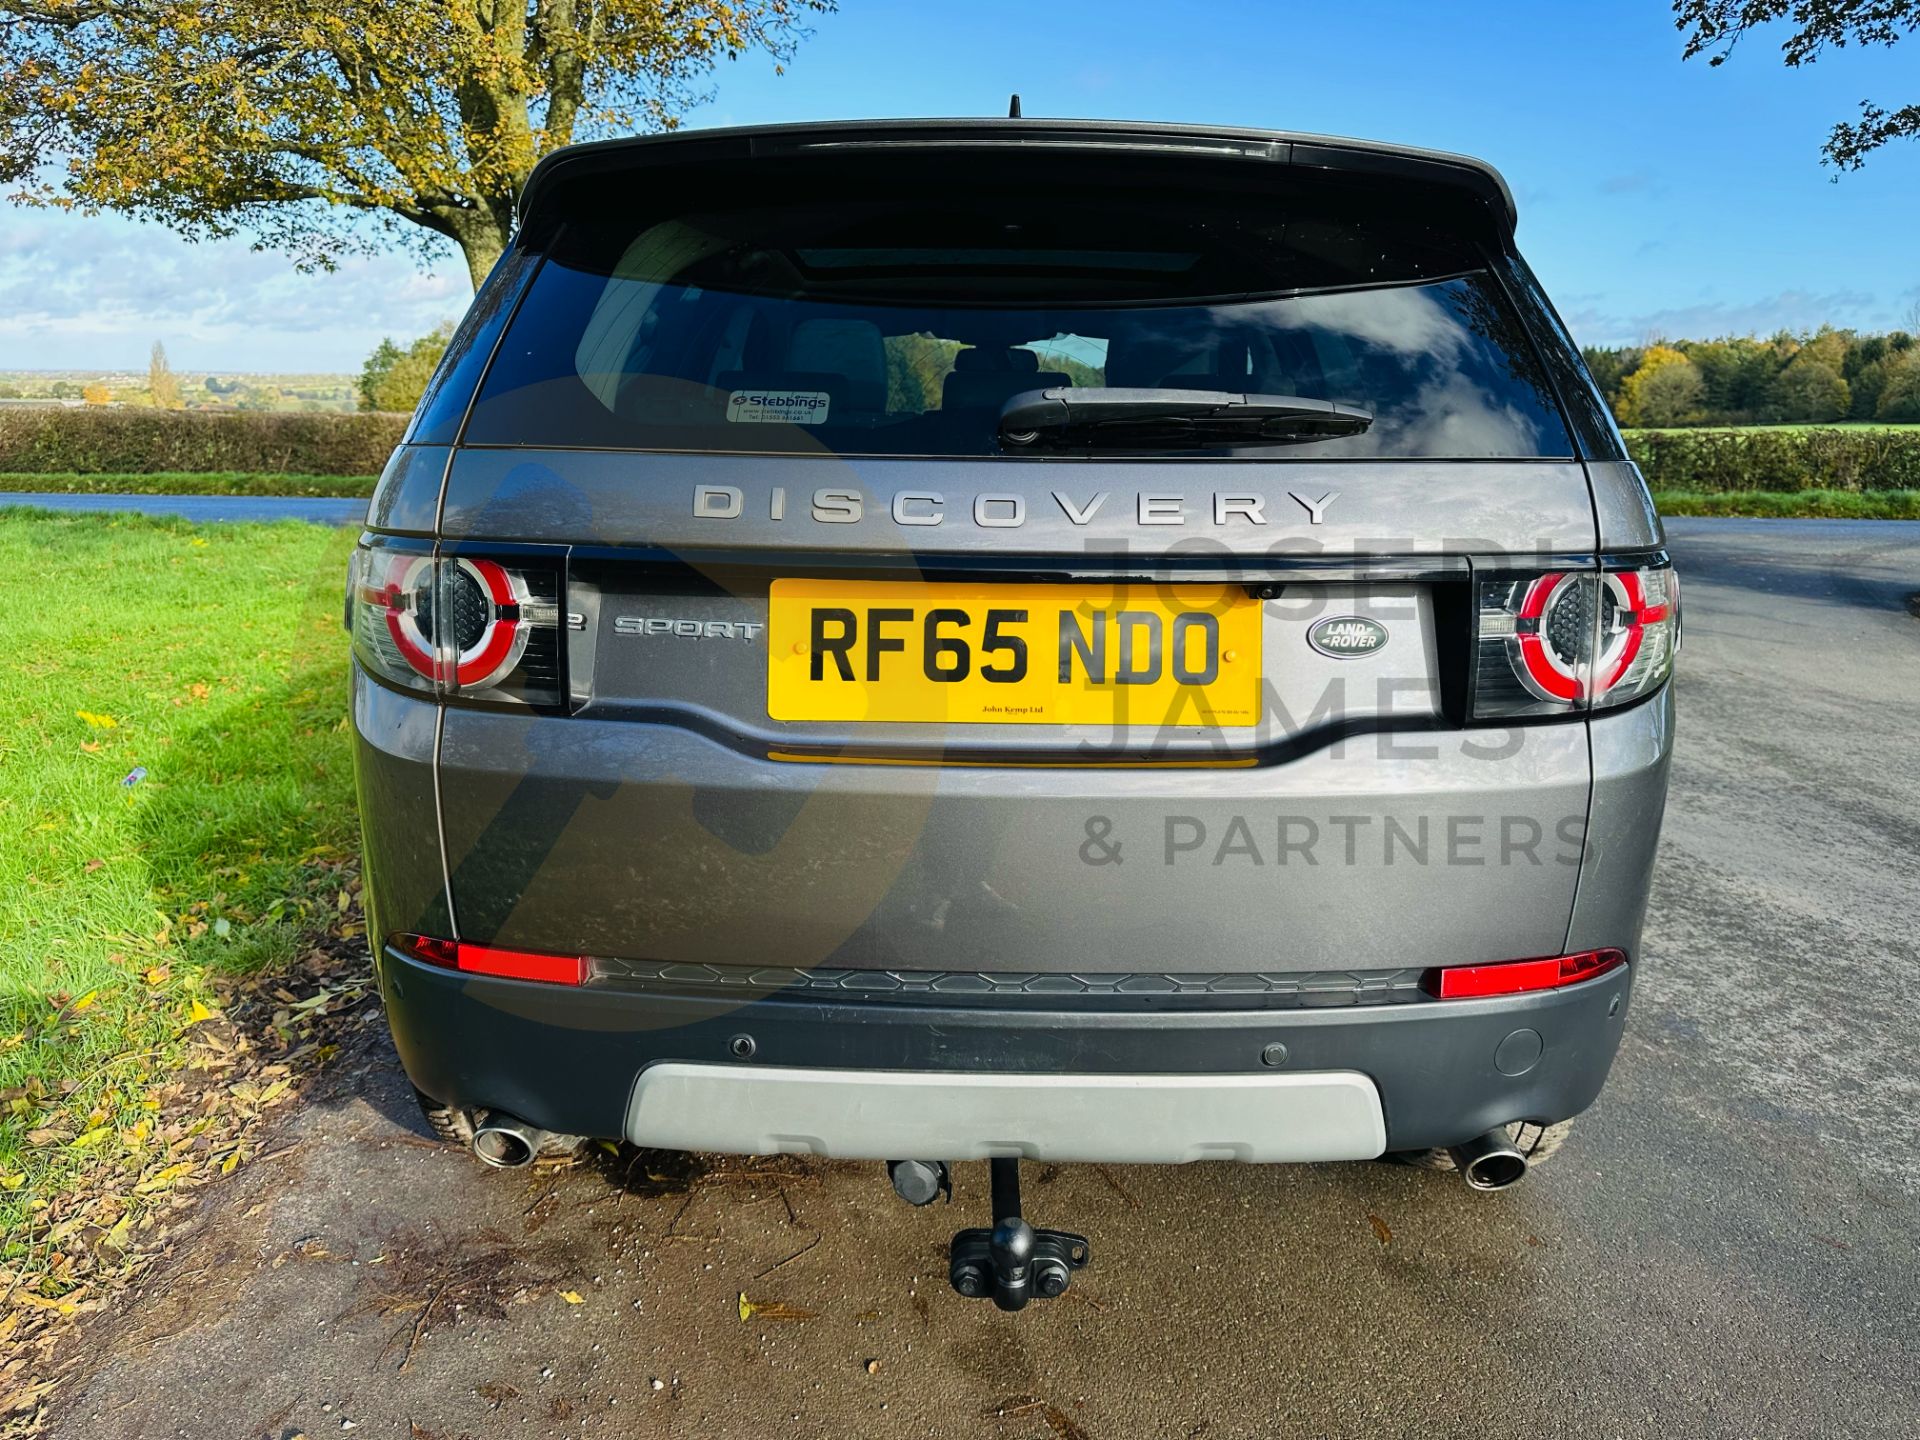 (ON SALE) LAND ROVER DISCOVERY SPORT *HSE EDITION* 7 SEATER SUV (2016 MODEL) 2.0 TD4-AUTO STOP/START - Image 12 of 56